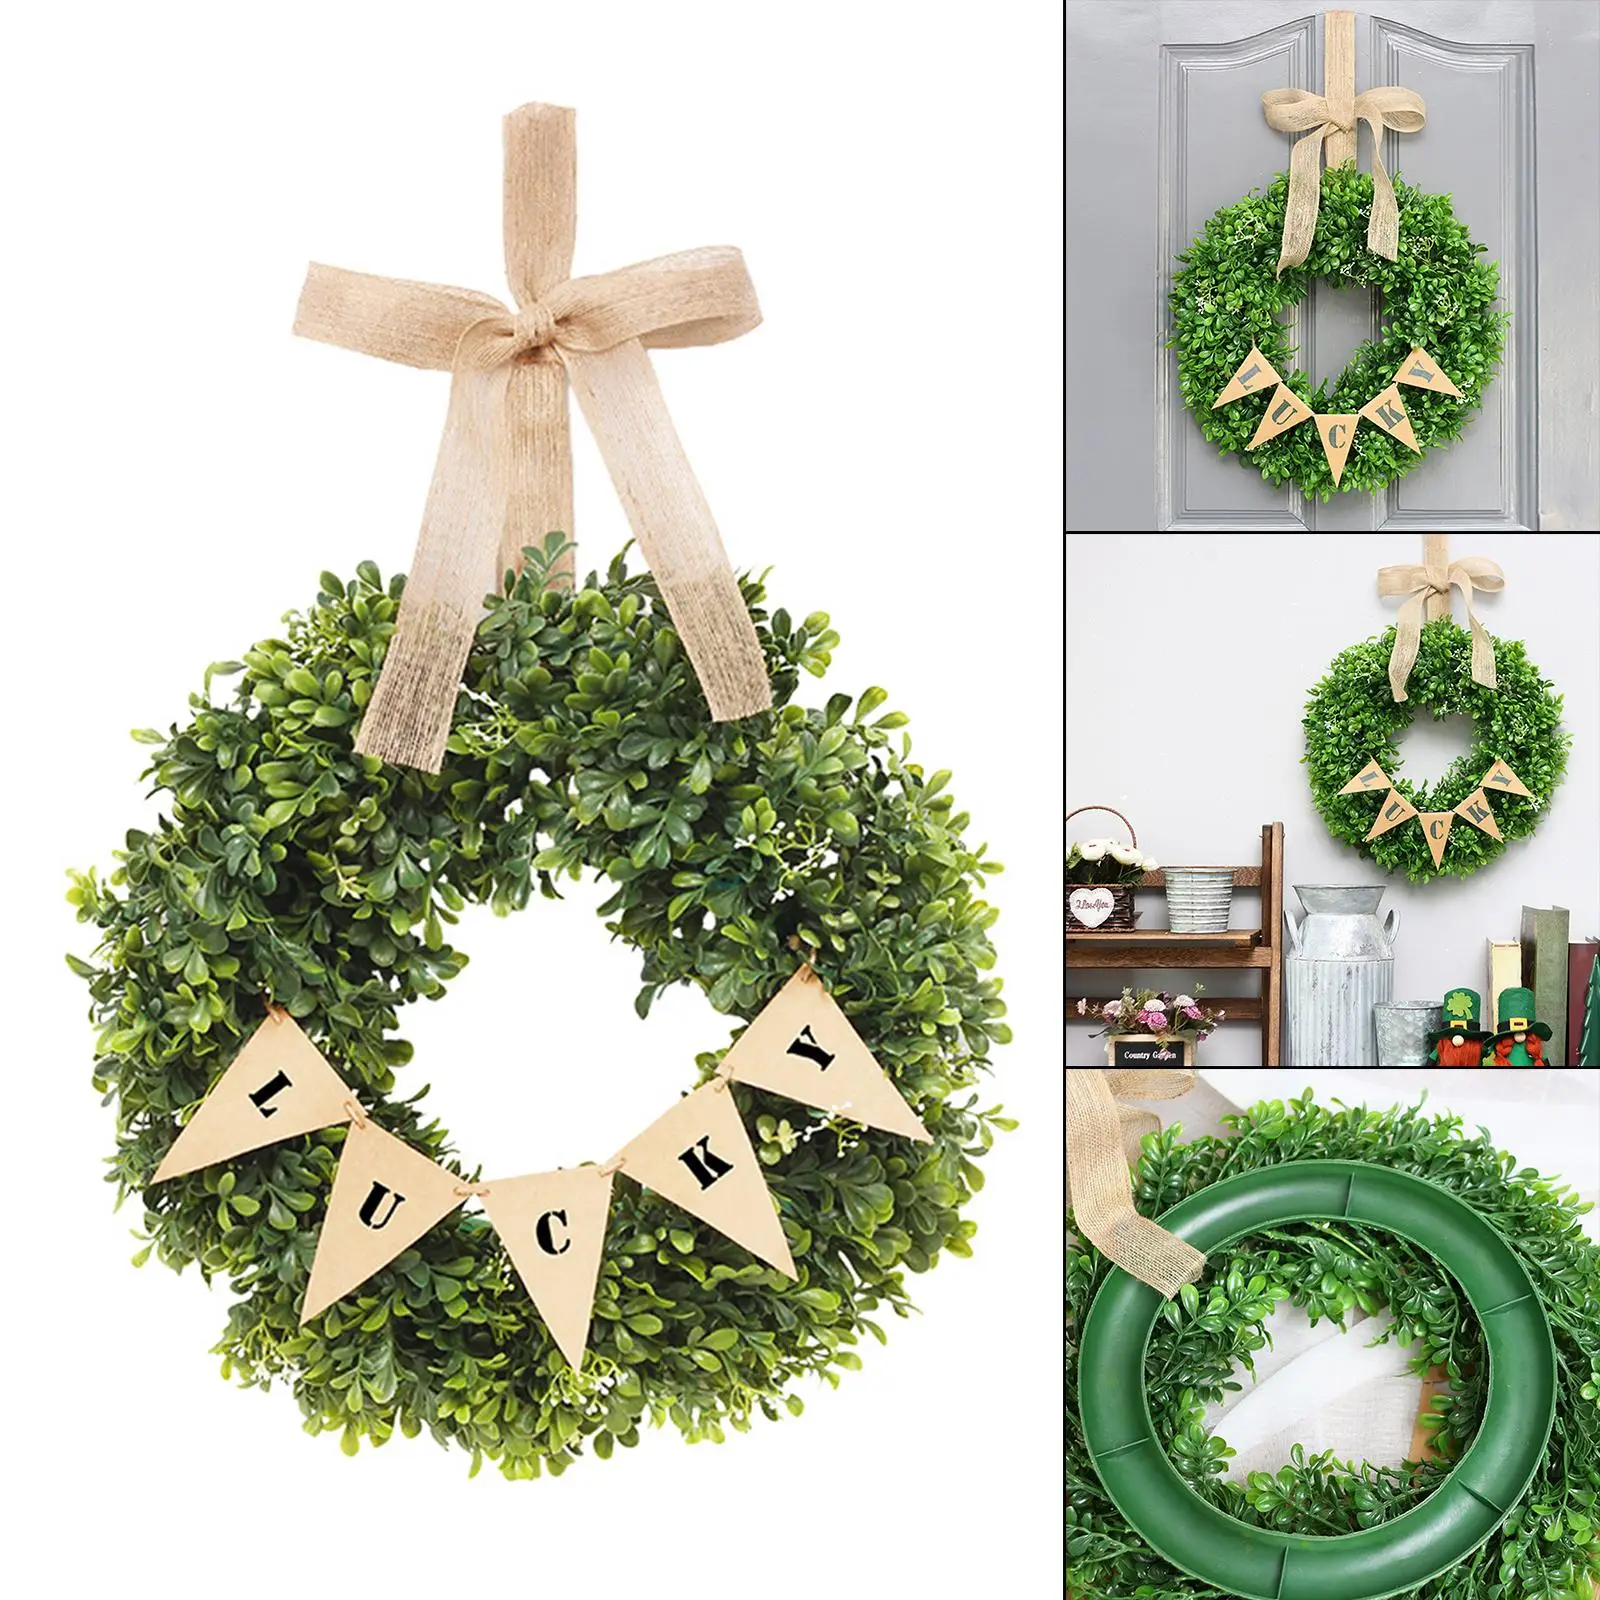 40cm Easter Greenery Wreath Spring Wreaths Window Party Decor ,Durable Materials Suit for All Scenarios Widely Usages Home D￩cor